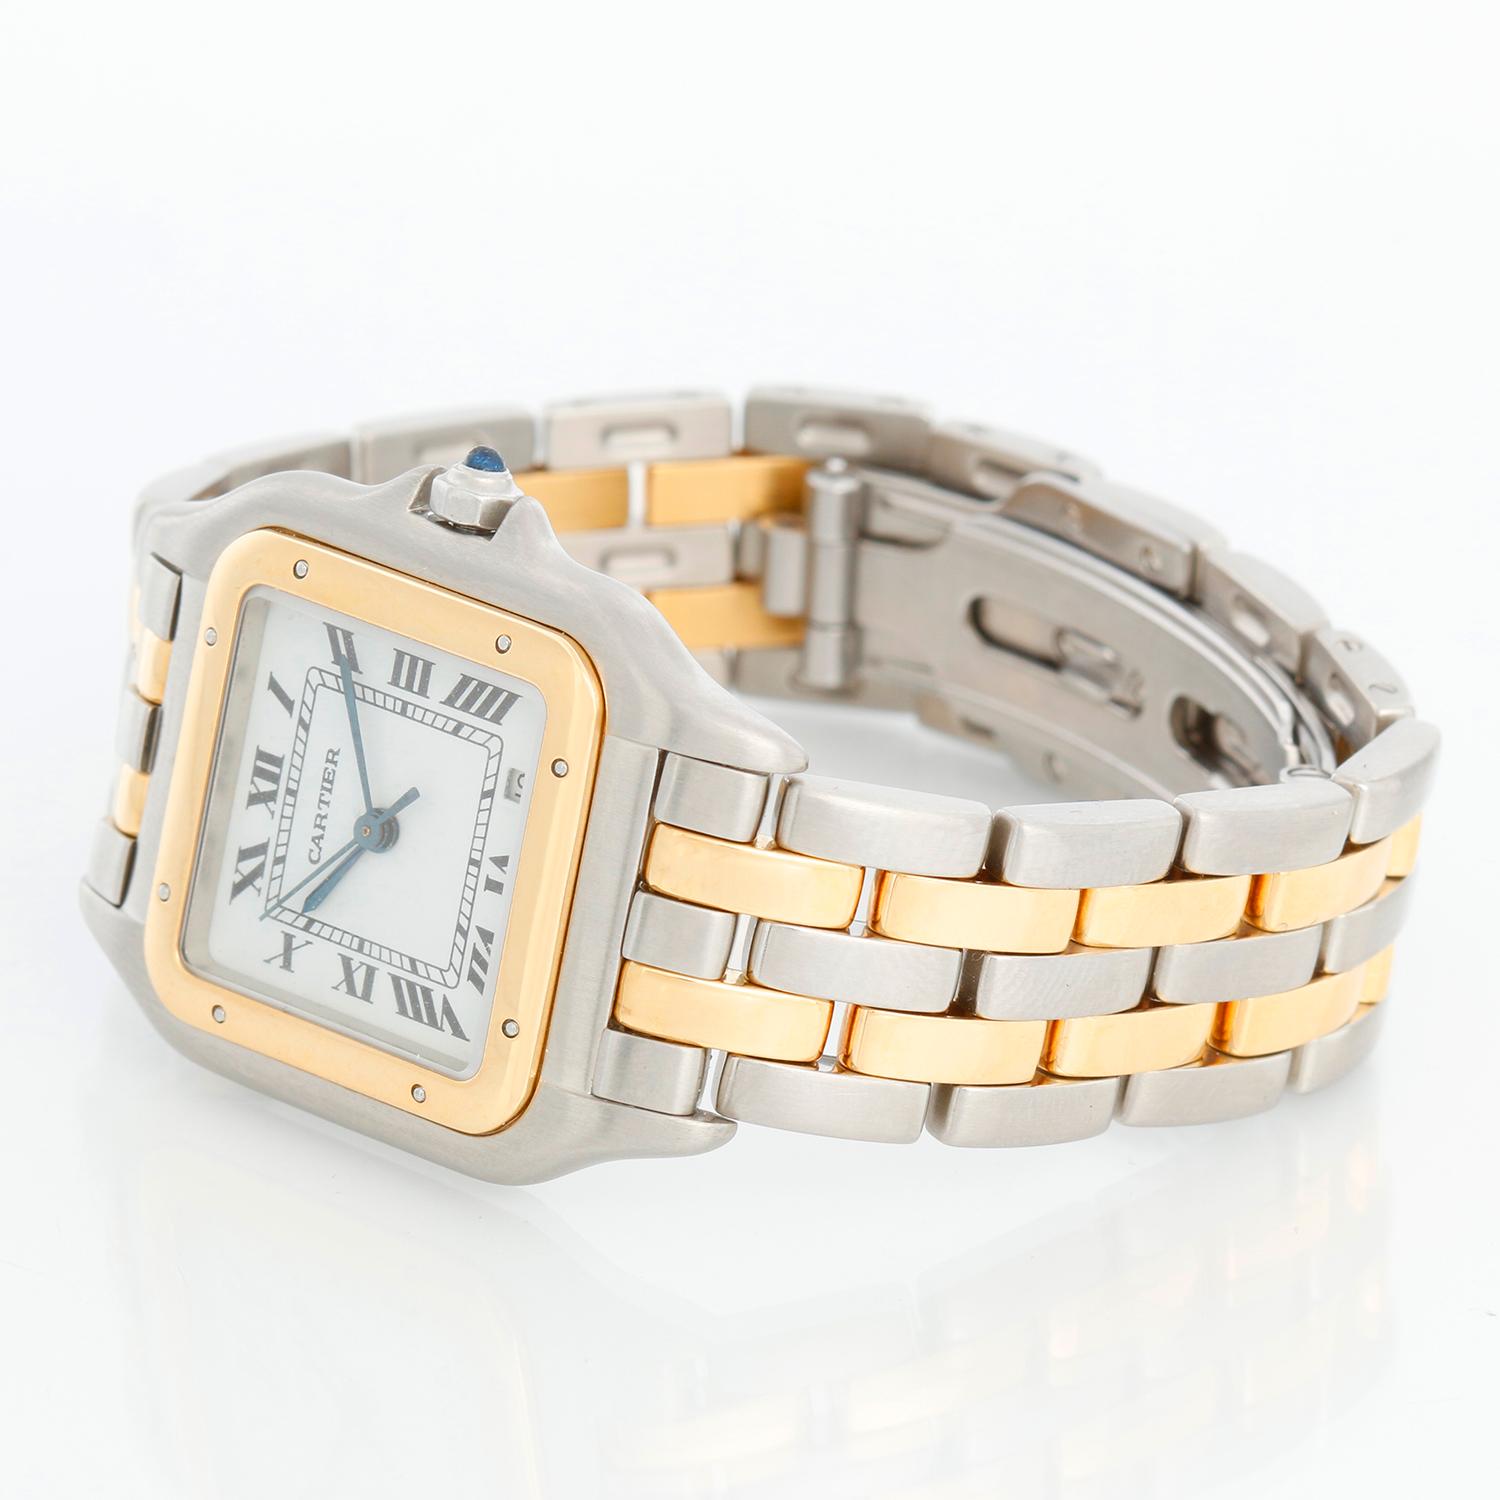 Cartier 2-Row Panther 2-Tone Steel & Gold Watch - Quartz. Stainless steel case with 18k yellow gold bezel (27mm x 37mm). Ivory colored dial with black Roman numerals and date at 5 o'clock. Stainless steel and 18k yellow 2-row Cartier Panther